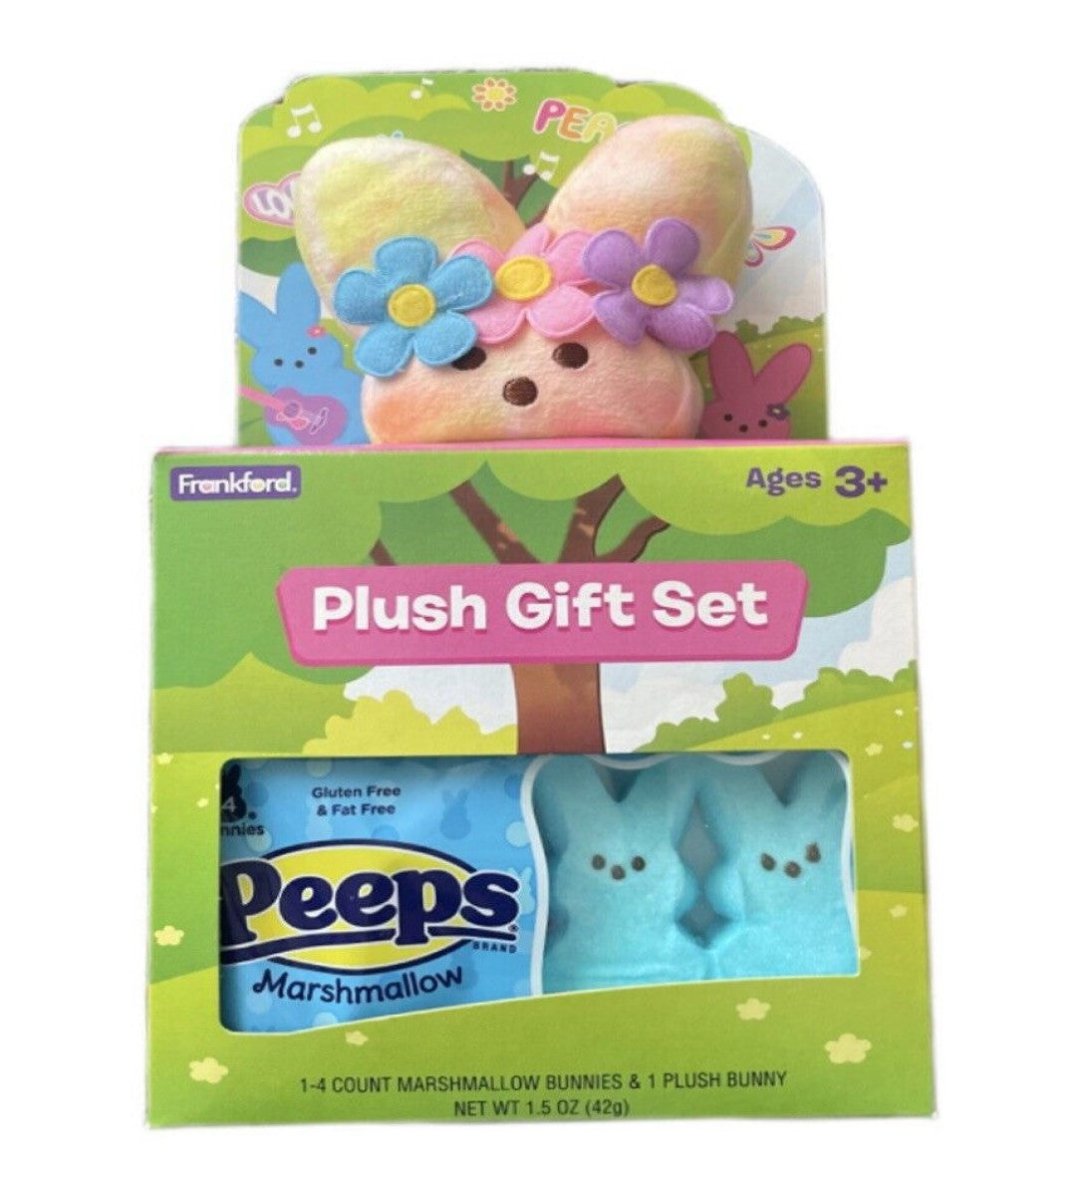 Peeps Easter Plush Flower Power Bunny 42g - Candy Mail UK